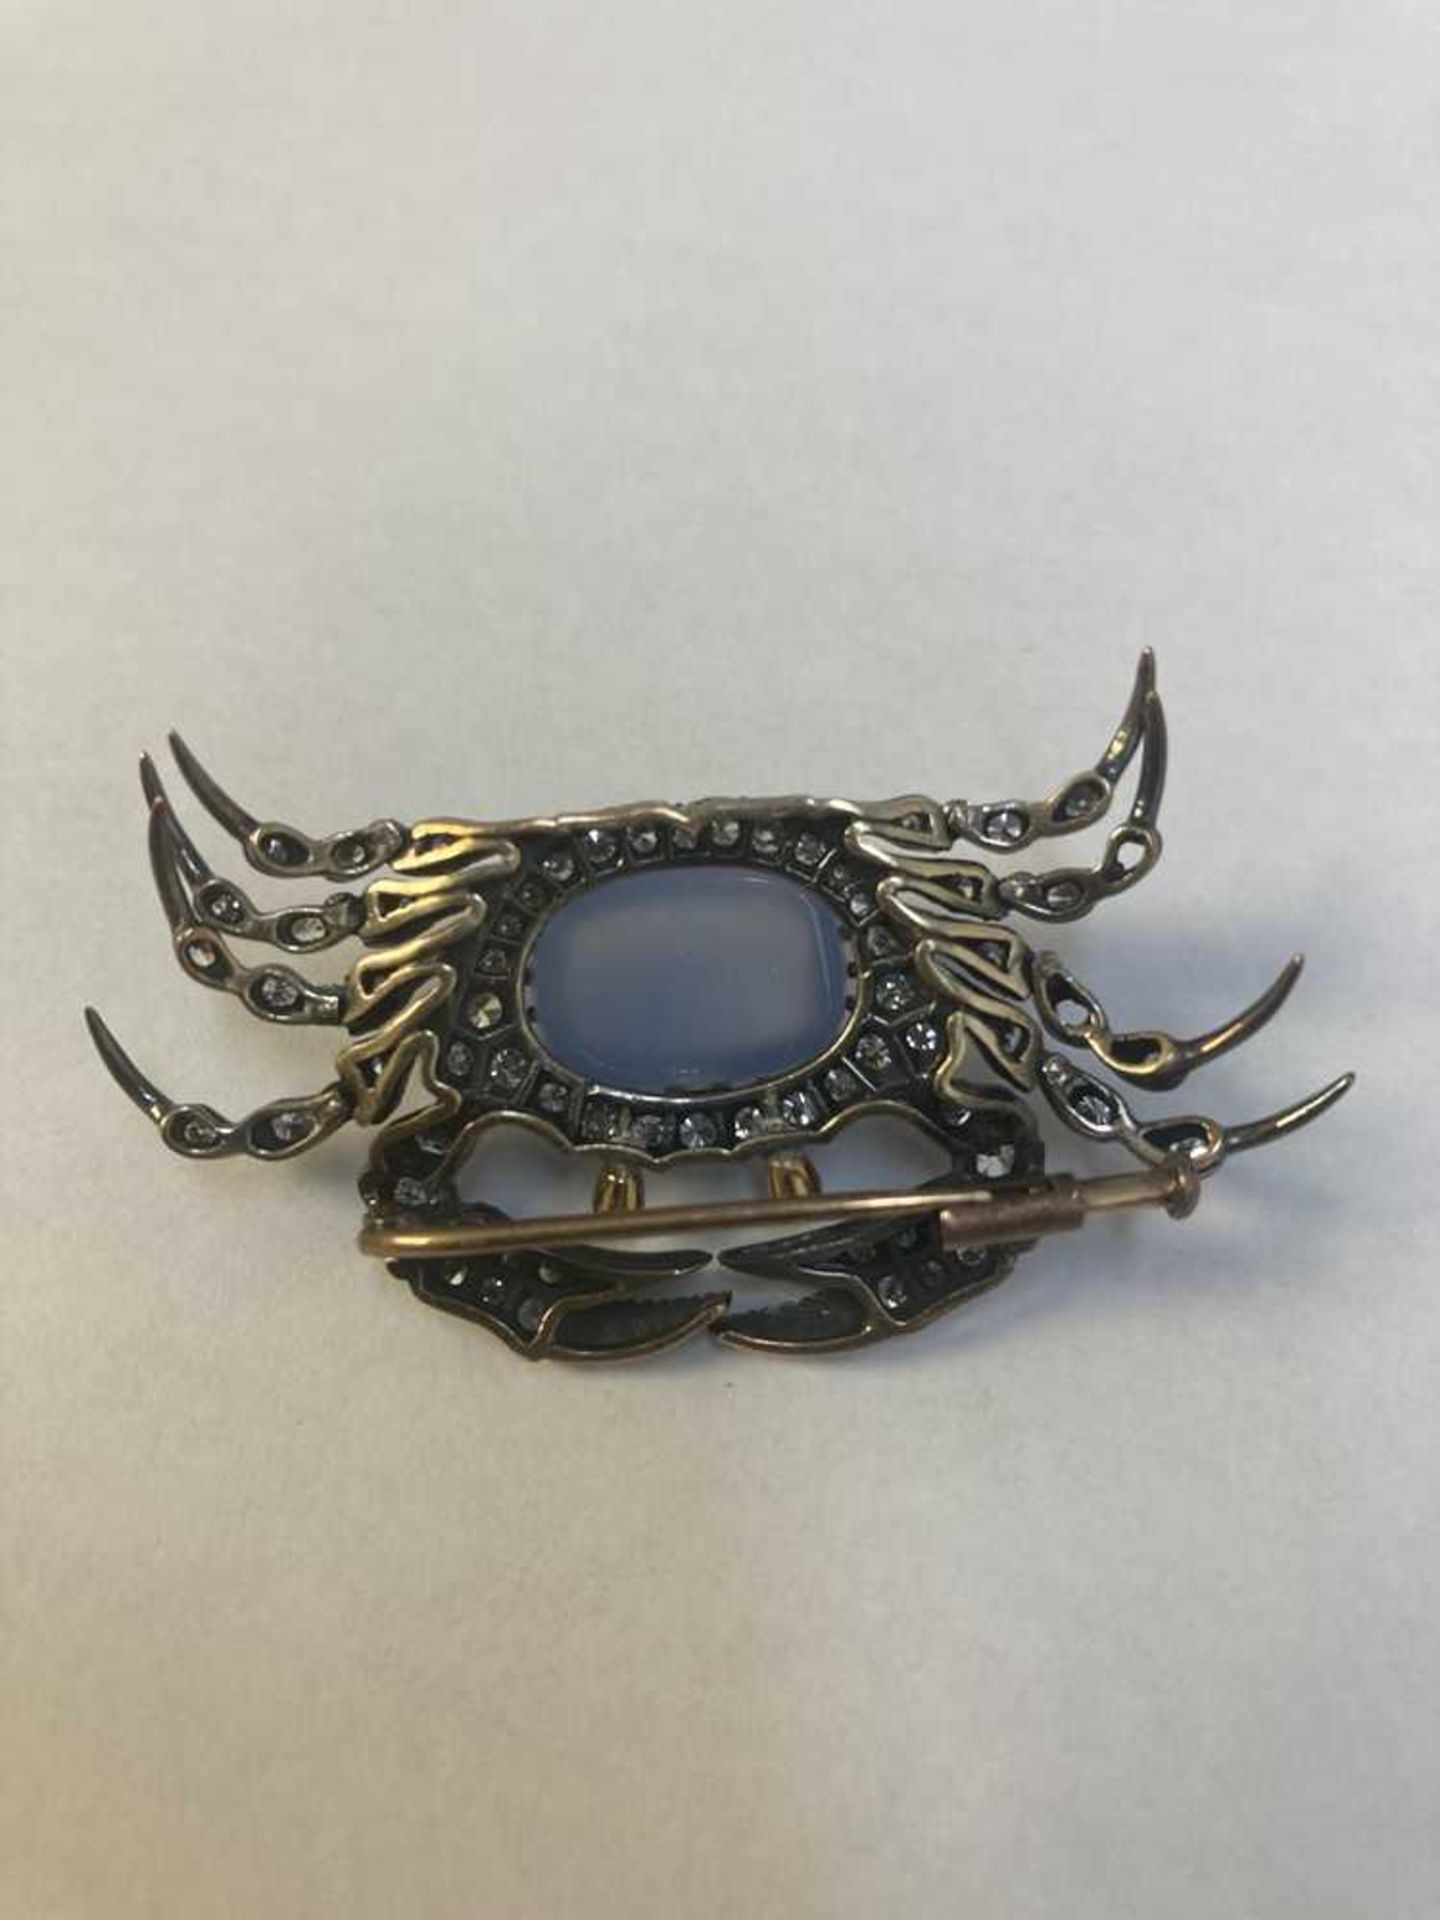 A chalcedony and diamond crab brooch - Image 5 of 6